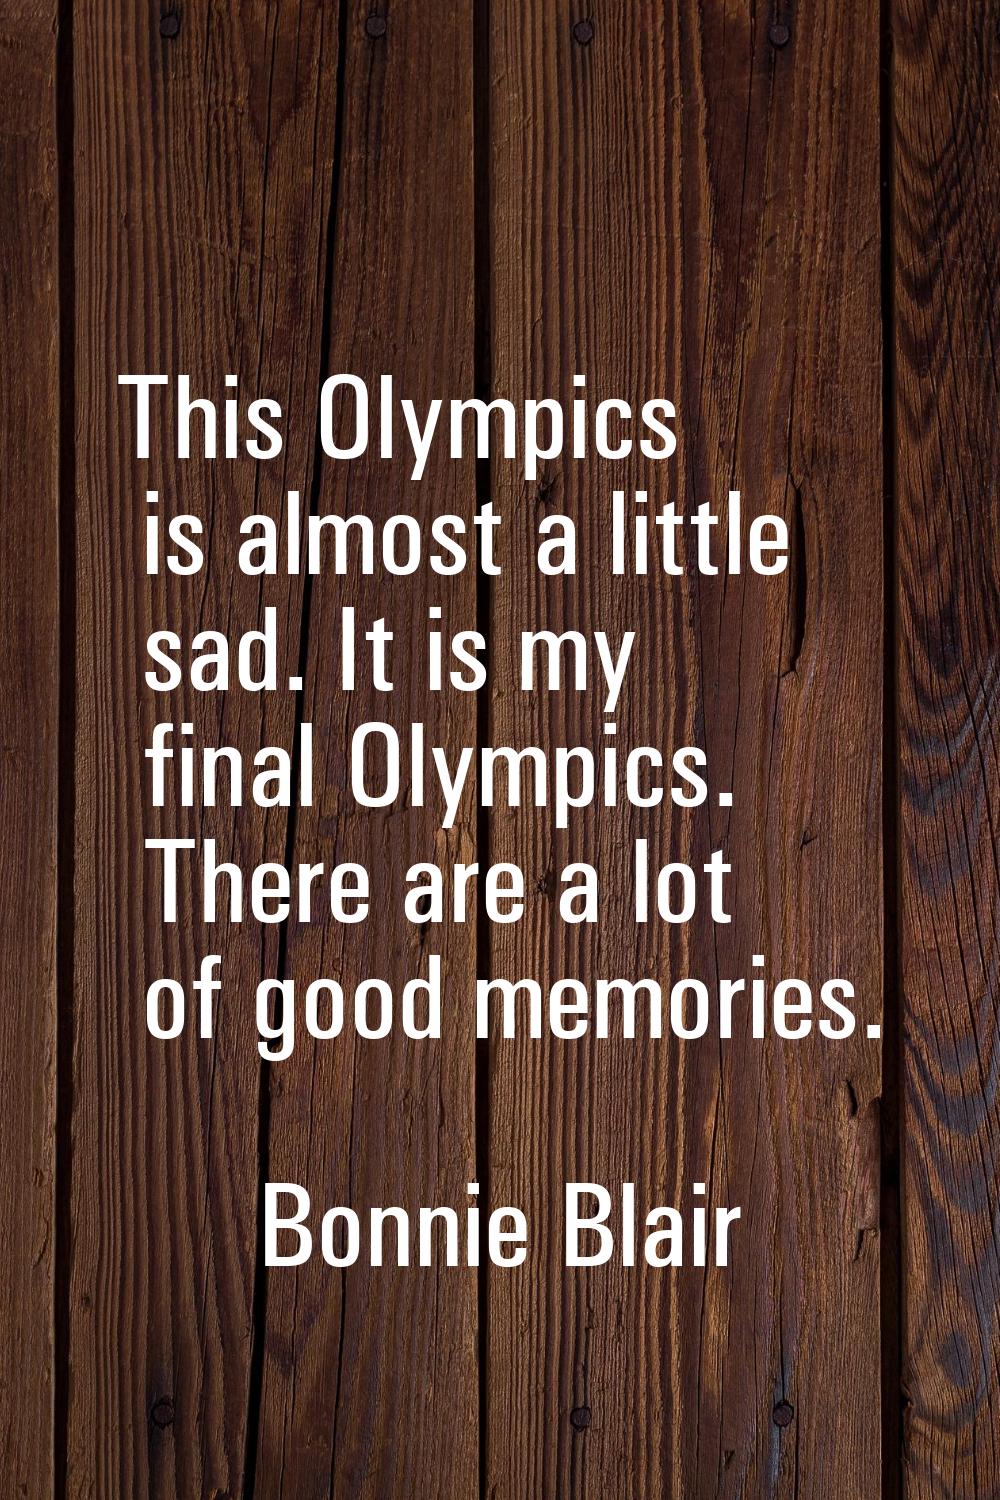 This Olympics is almost a little sad. It is my final Olympics. There are a lot of good memories.